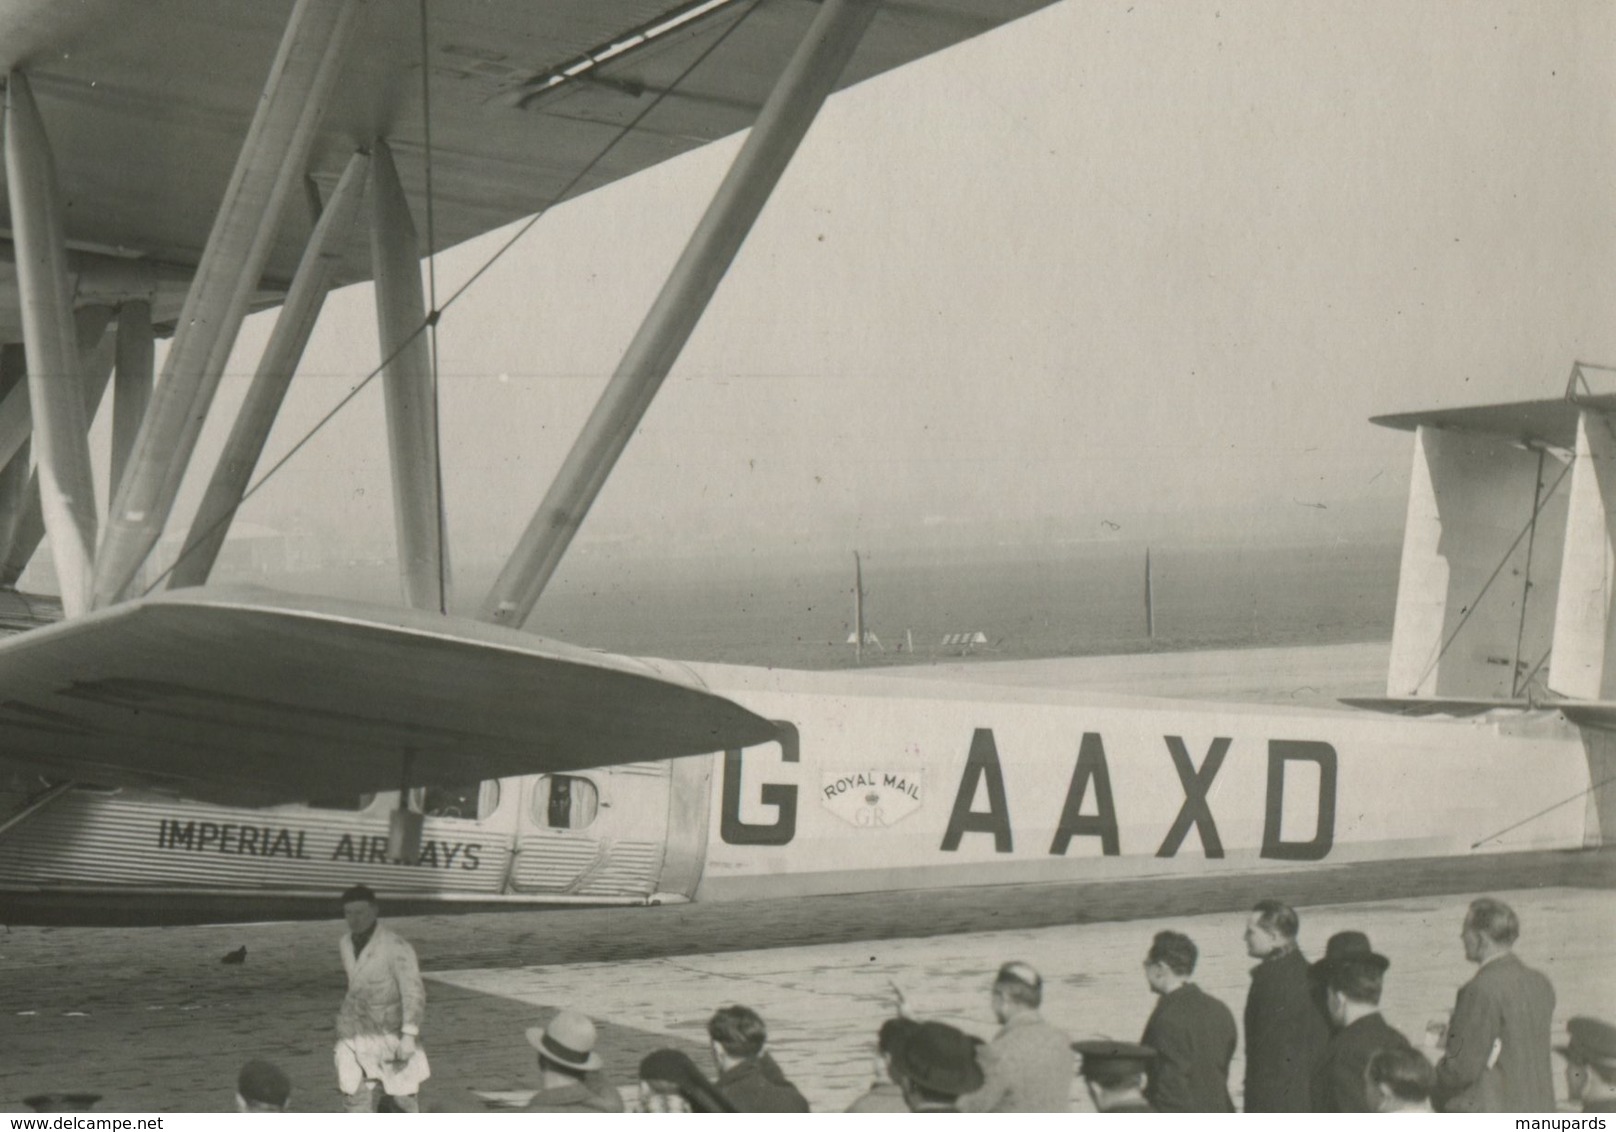 1933 / PHOTO / HANDLEY PAGE HP 42 W / G - AAXD / HORATIUS / IMPERIAL AIRWAYS / LE BOURGET / SHELL